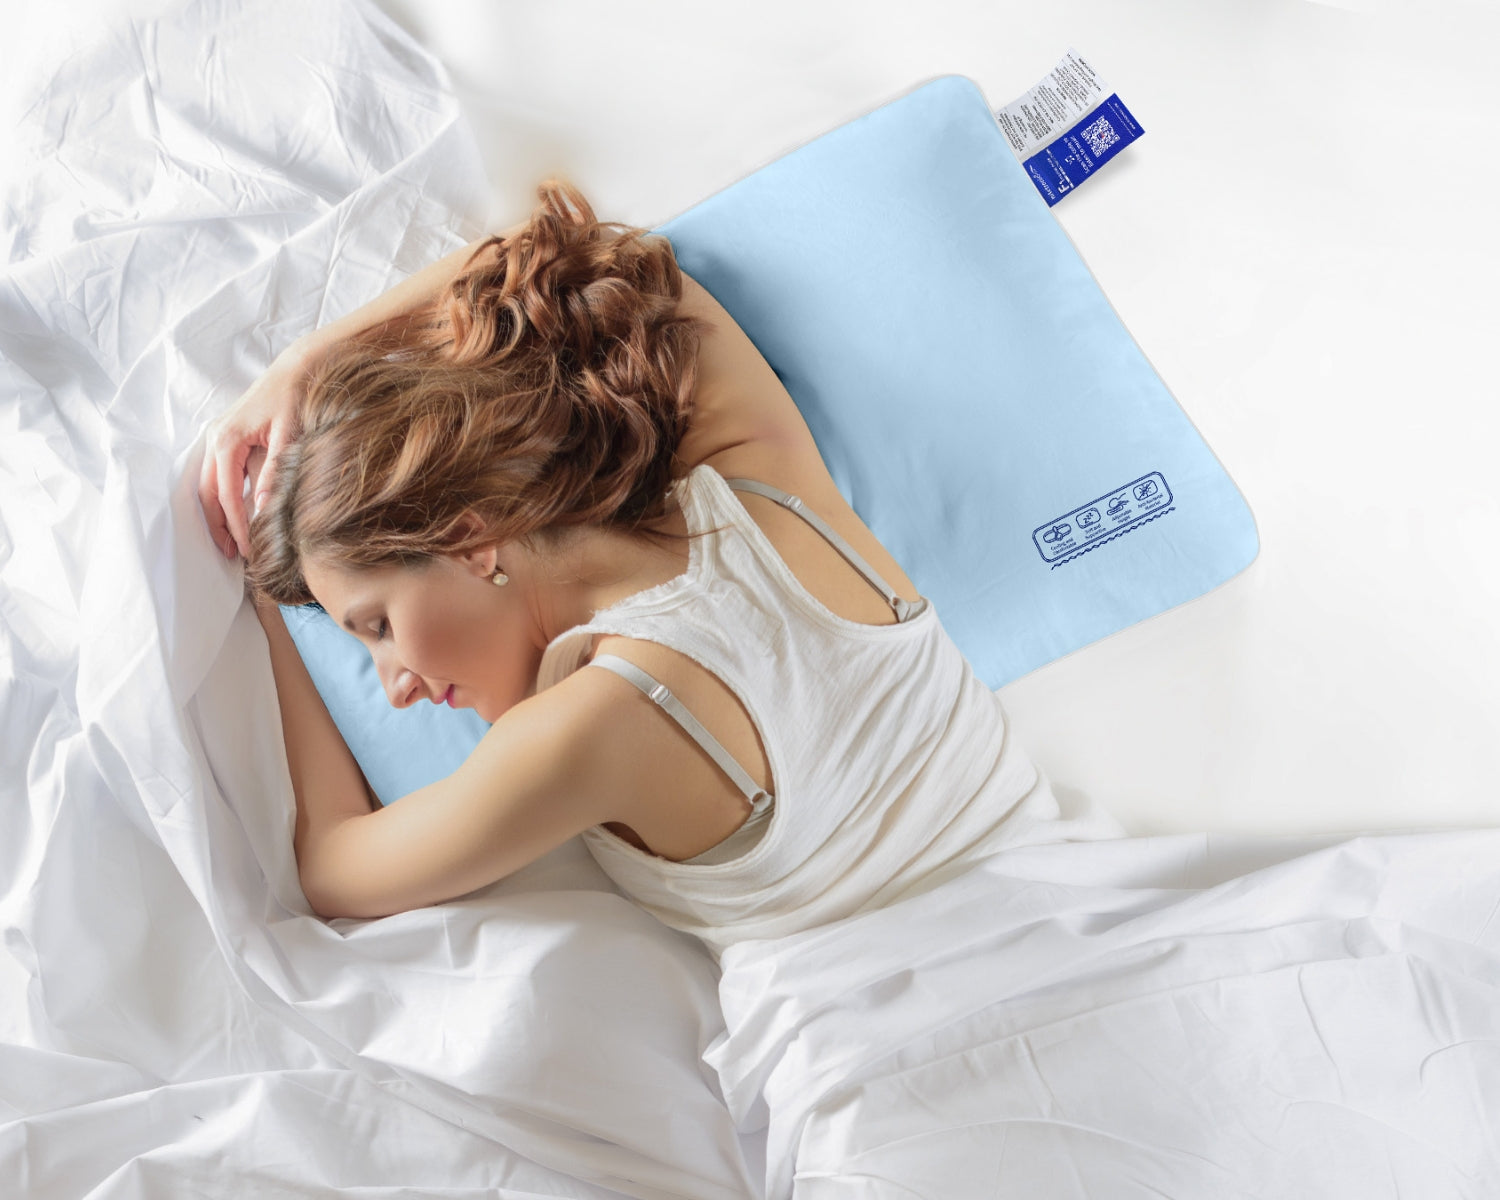 Best Cooling Pillows: Nitetronic F1 Floating Pillow